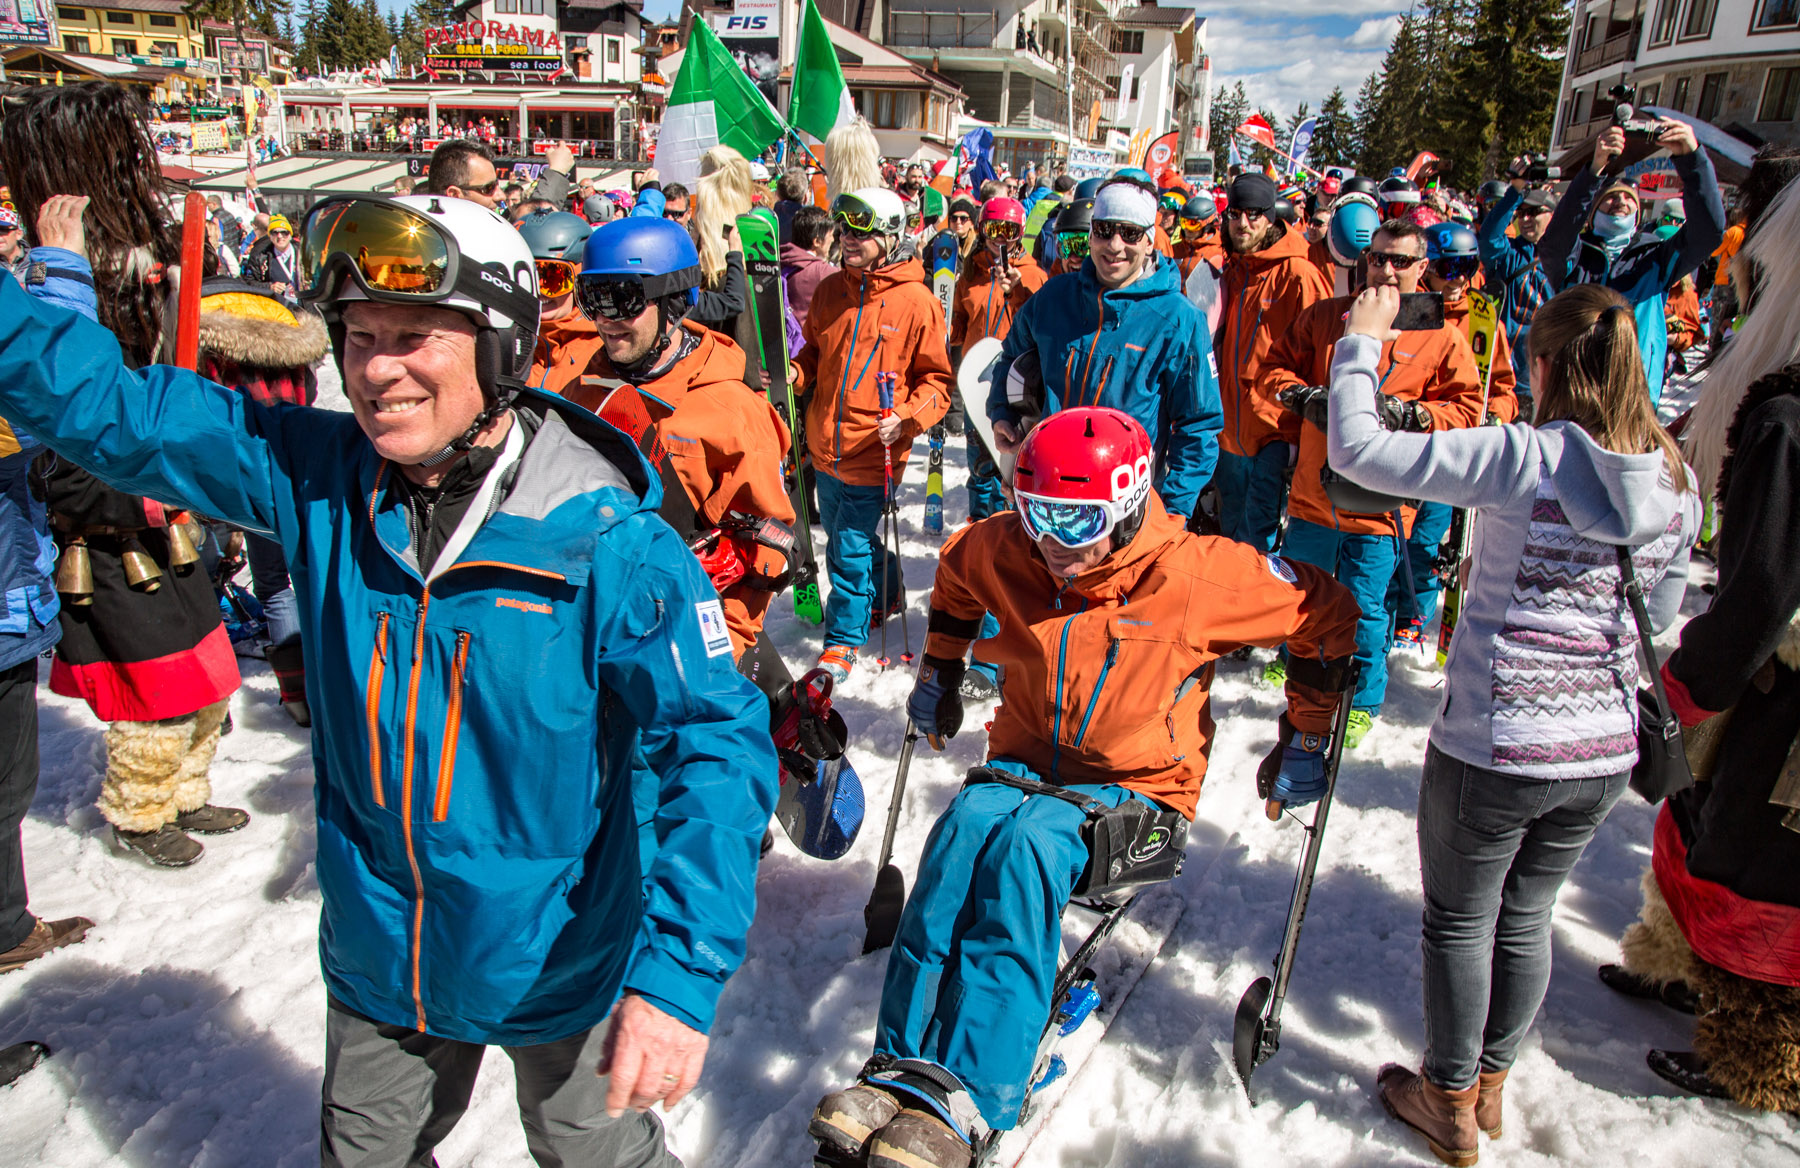 PSIA-AASI Chairman of the Board of Directors Ed Younglove at the Interski 2019 Opening Day Parade